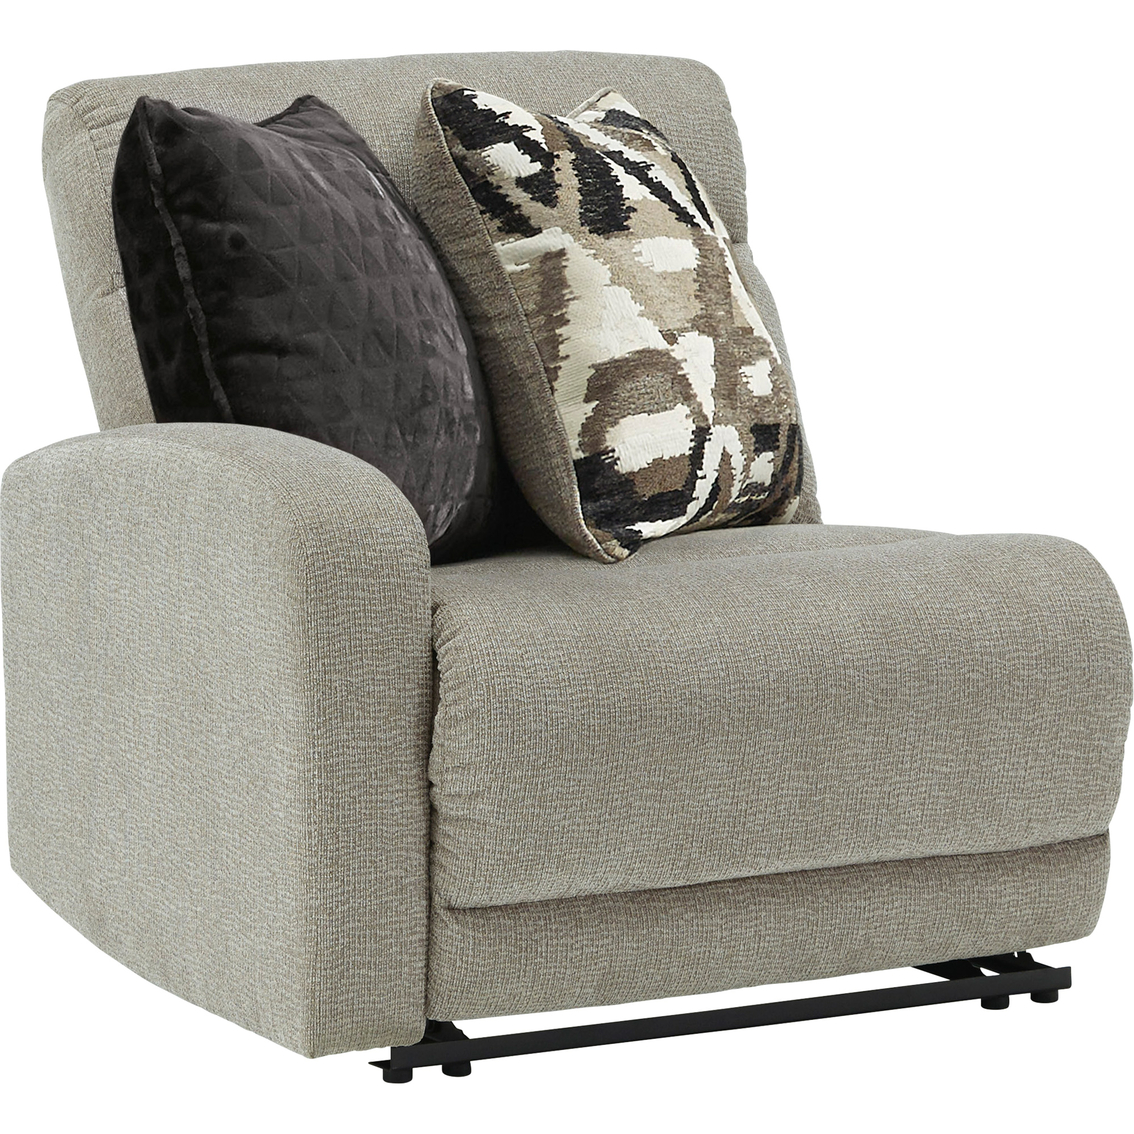 Signature Design by Ashley Colleyville RAF Chaise with Console, 3 Power Recliners - Image 2 of 9